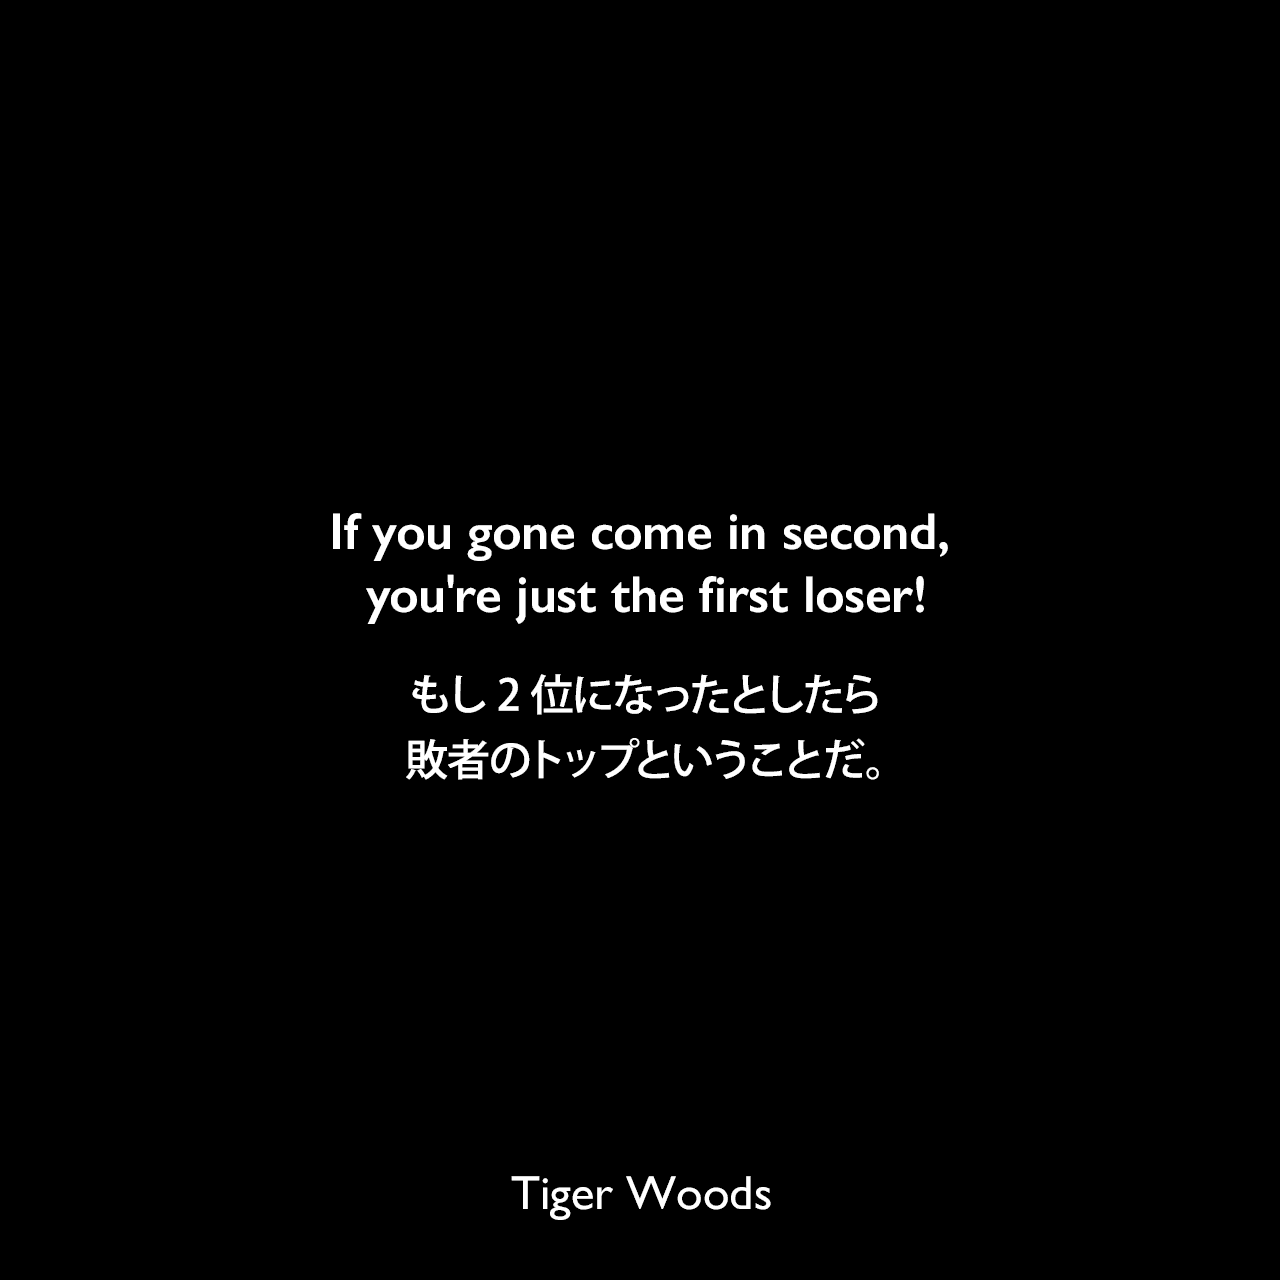 If you gone come in second, you're just the first loser!もし2位になったとしたら、敗者のトップということだ。Tiger Woods